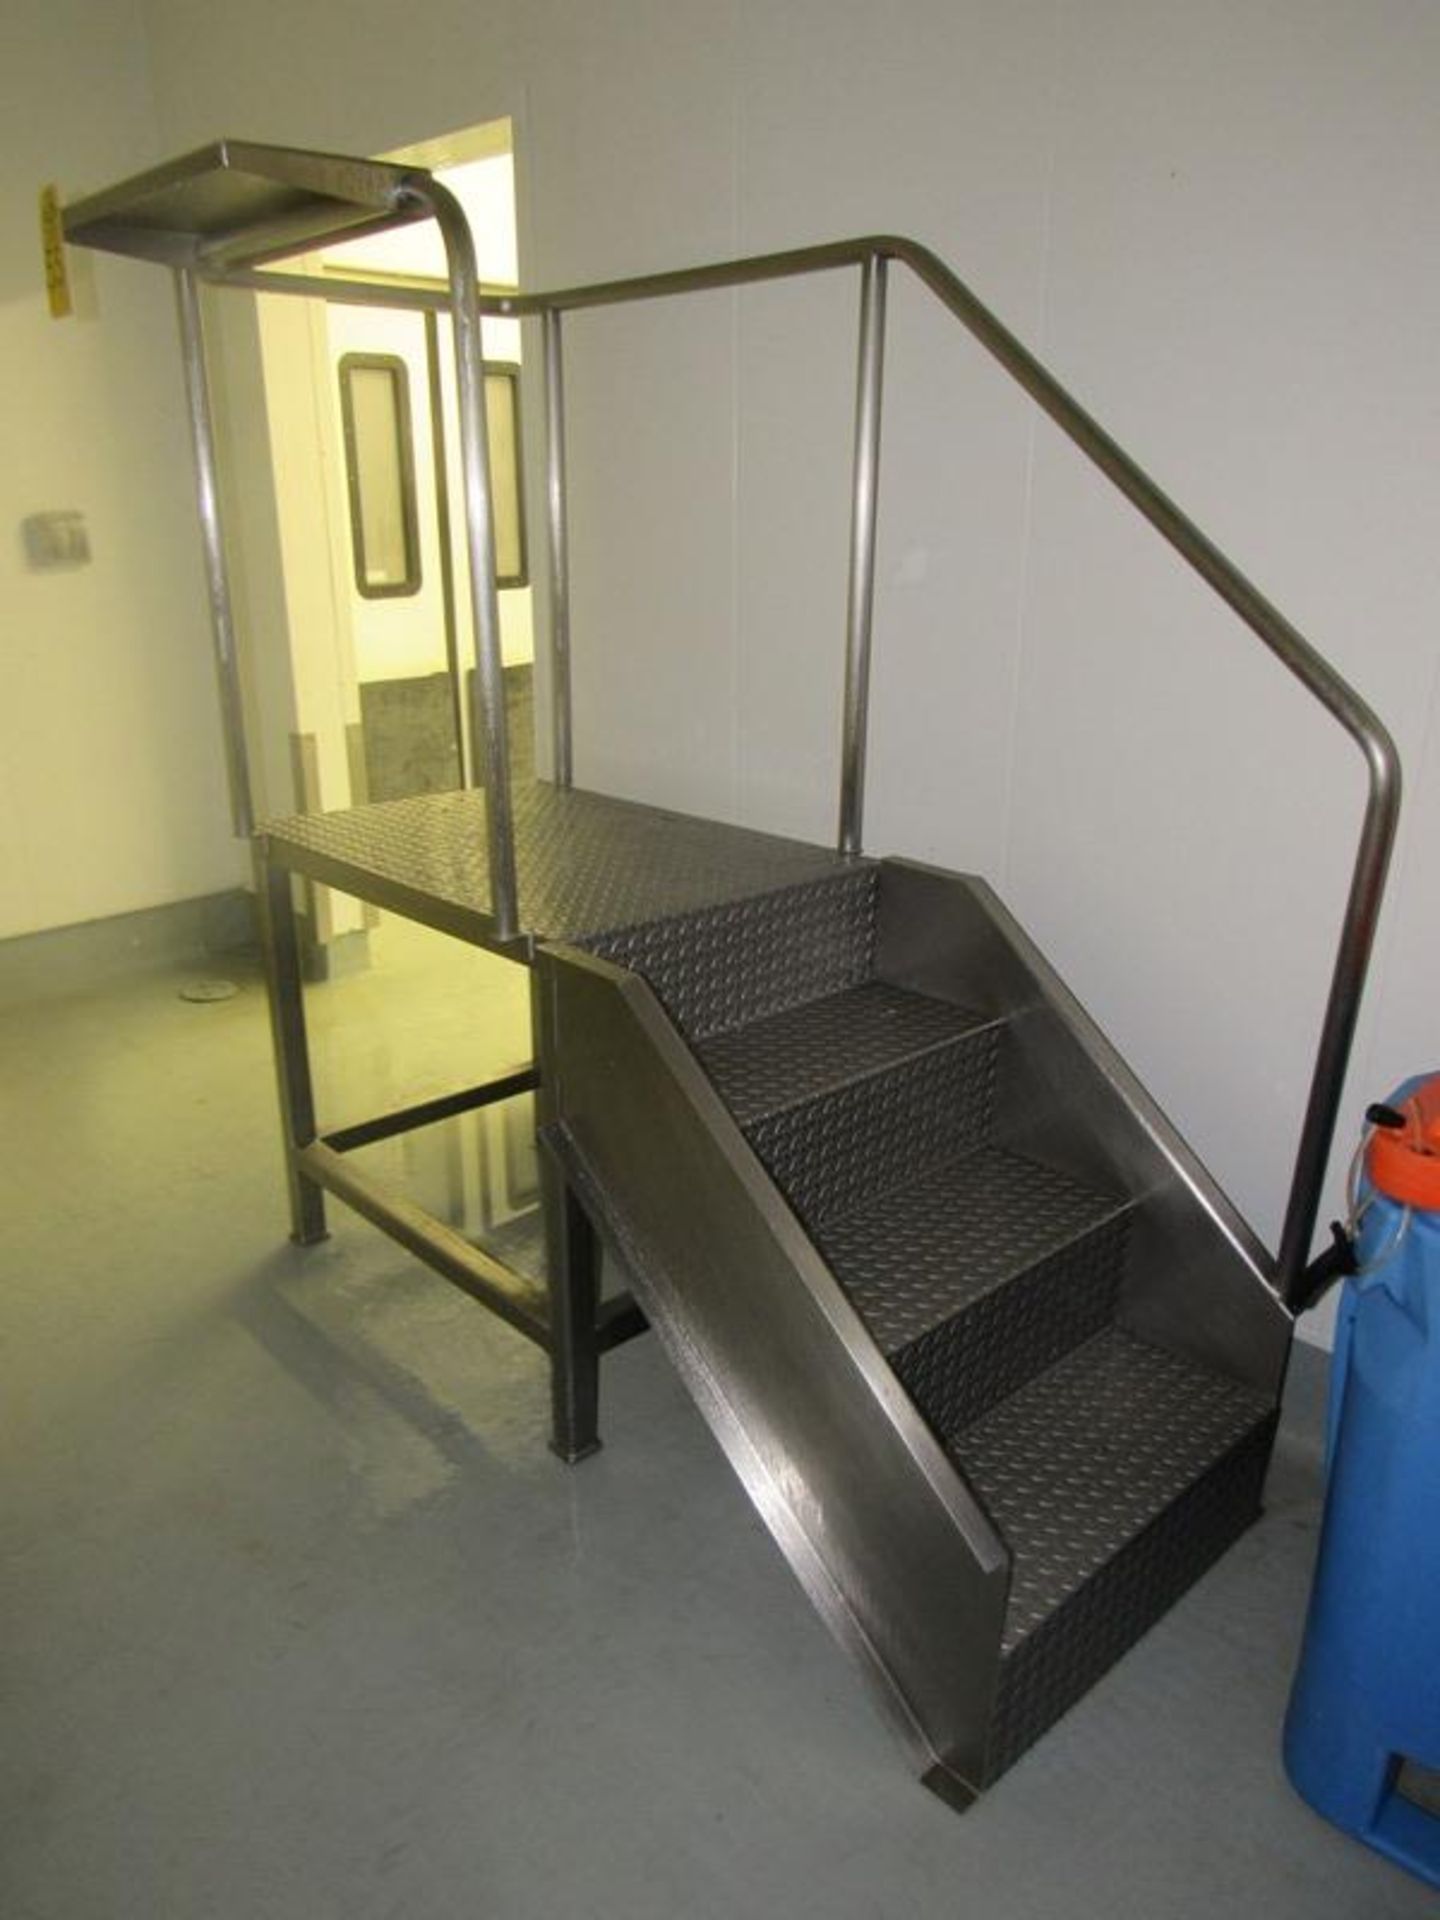 Stainless Steel Platform 25" W X 67" L with (3) stairs, 6' tall with handrail (Required Rigging Fee: